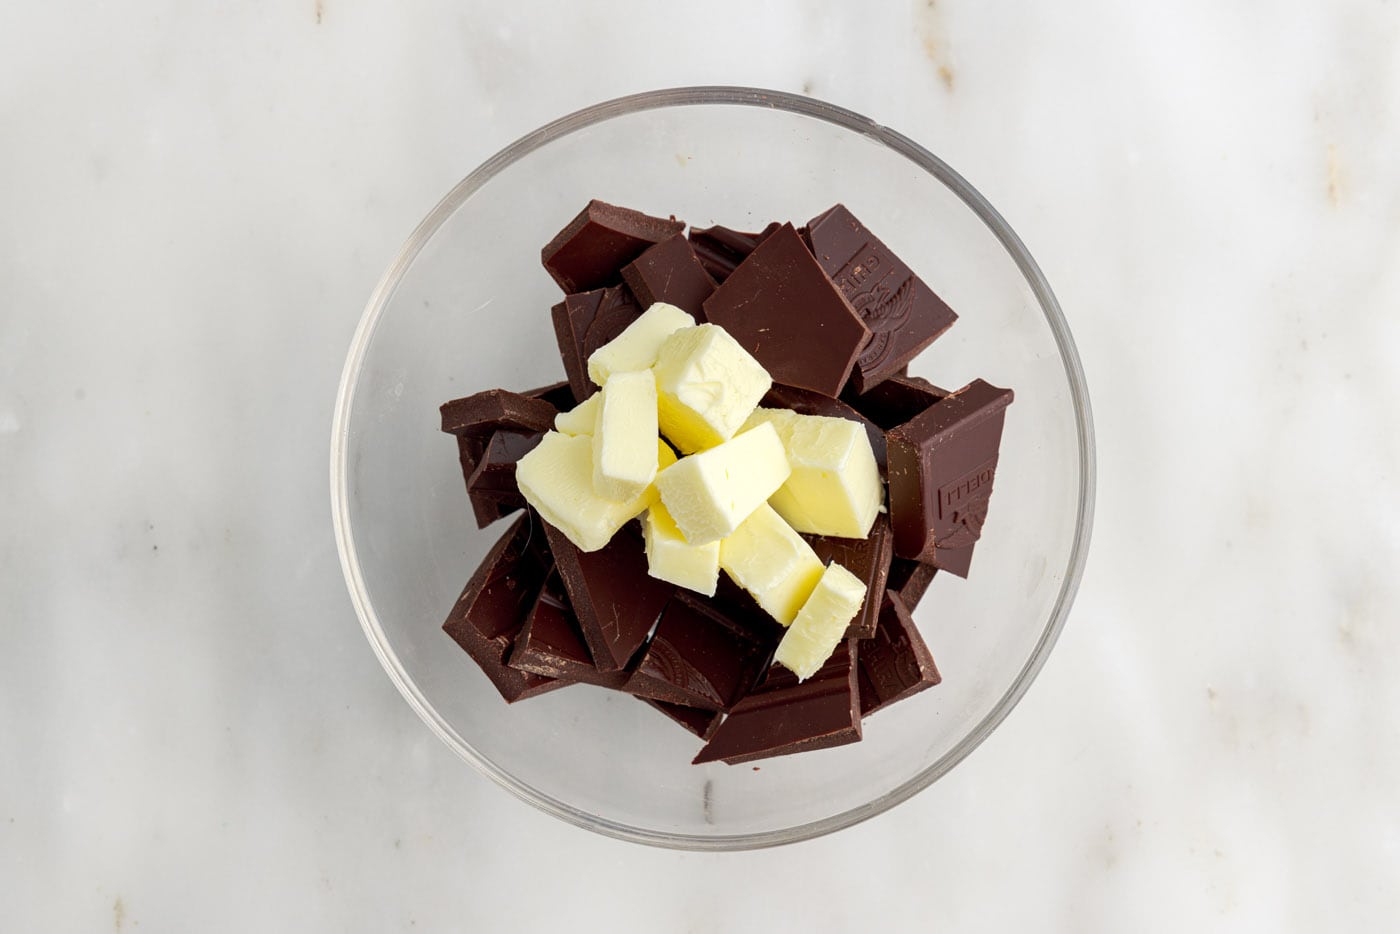 chopped chocolate and butter in a bowl